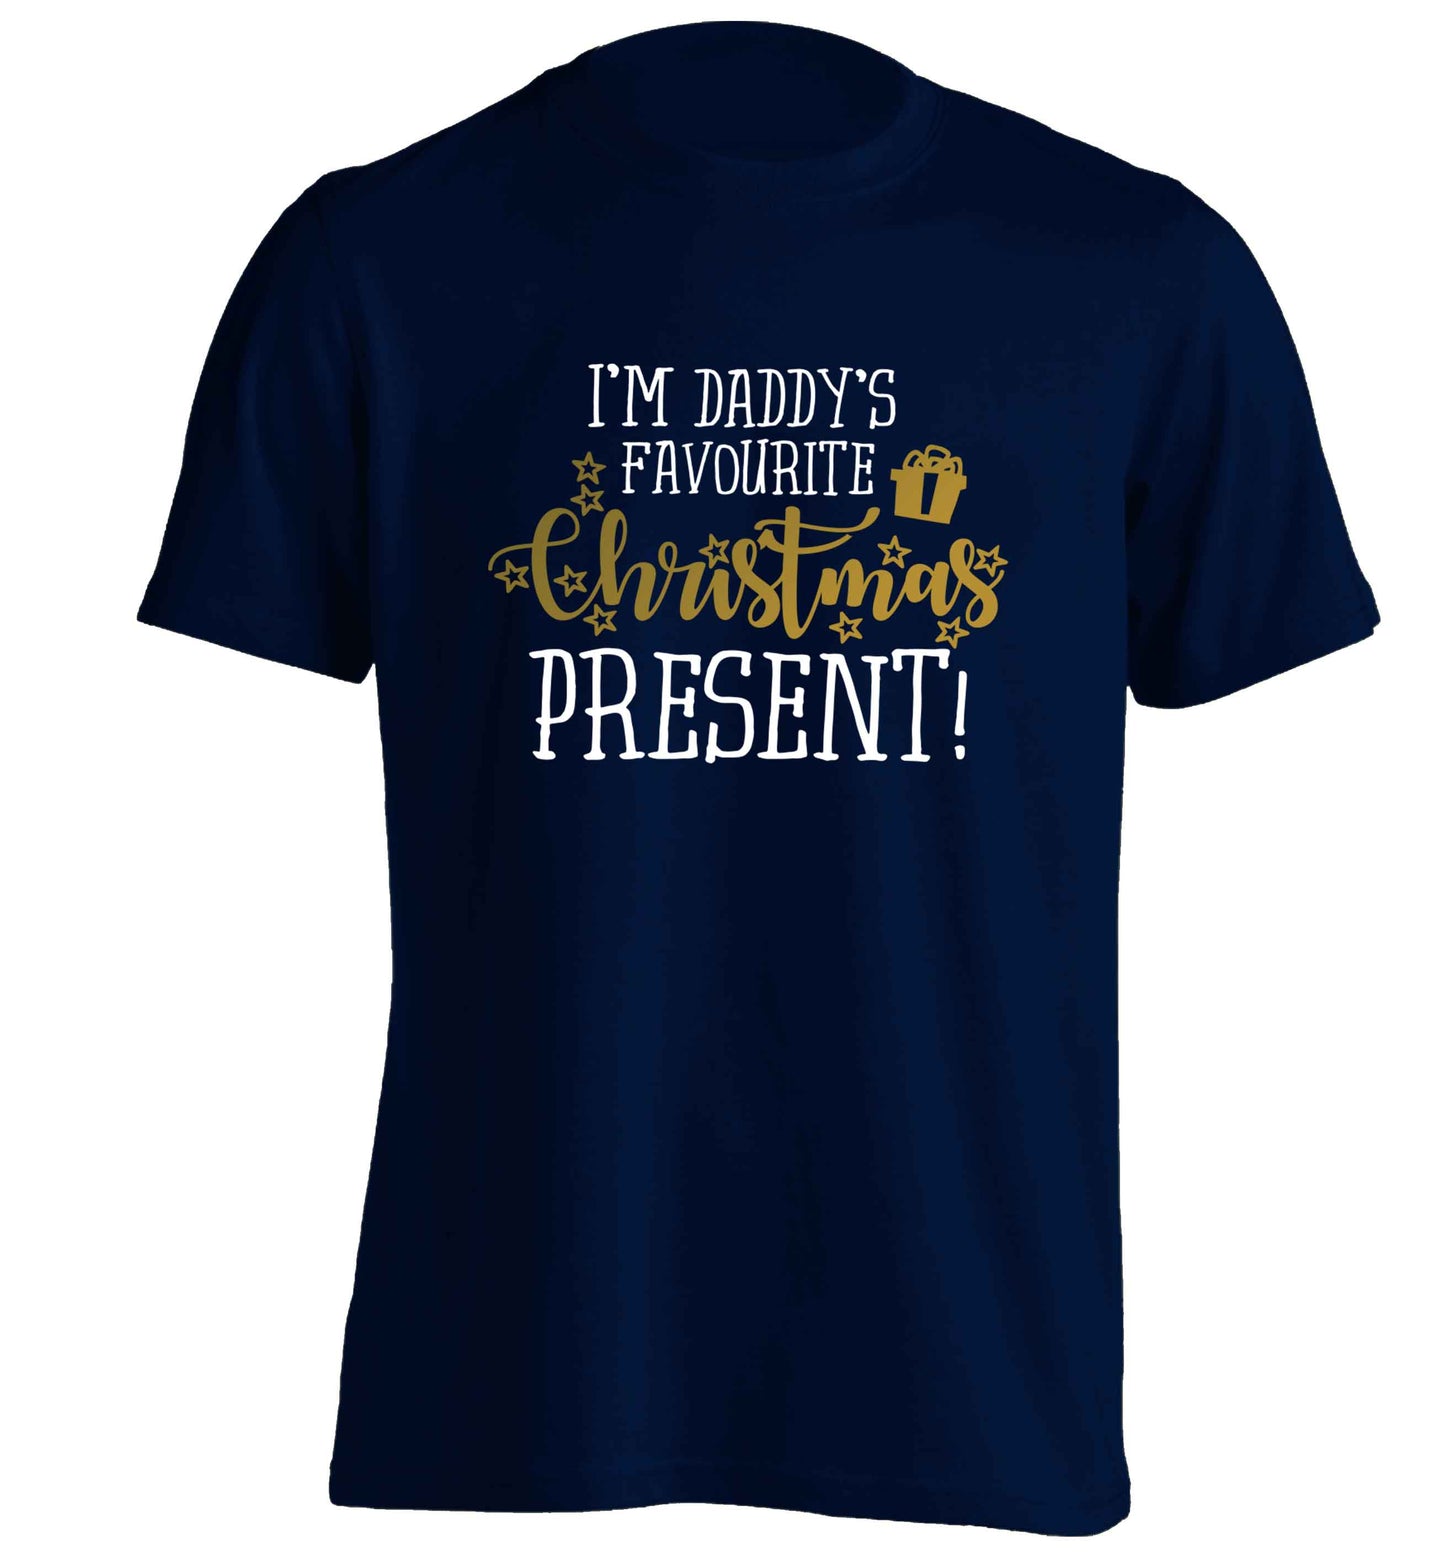 Daddy's favourite Christmas present adults unisex navy Tshirt 2XL